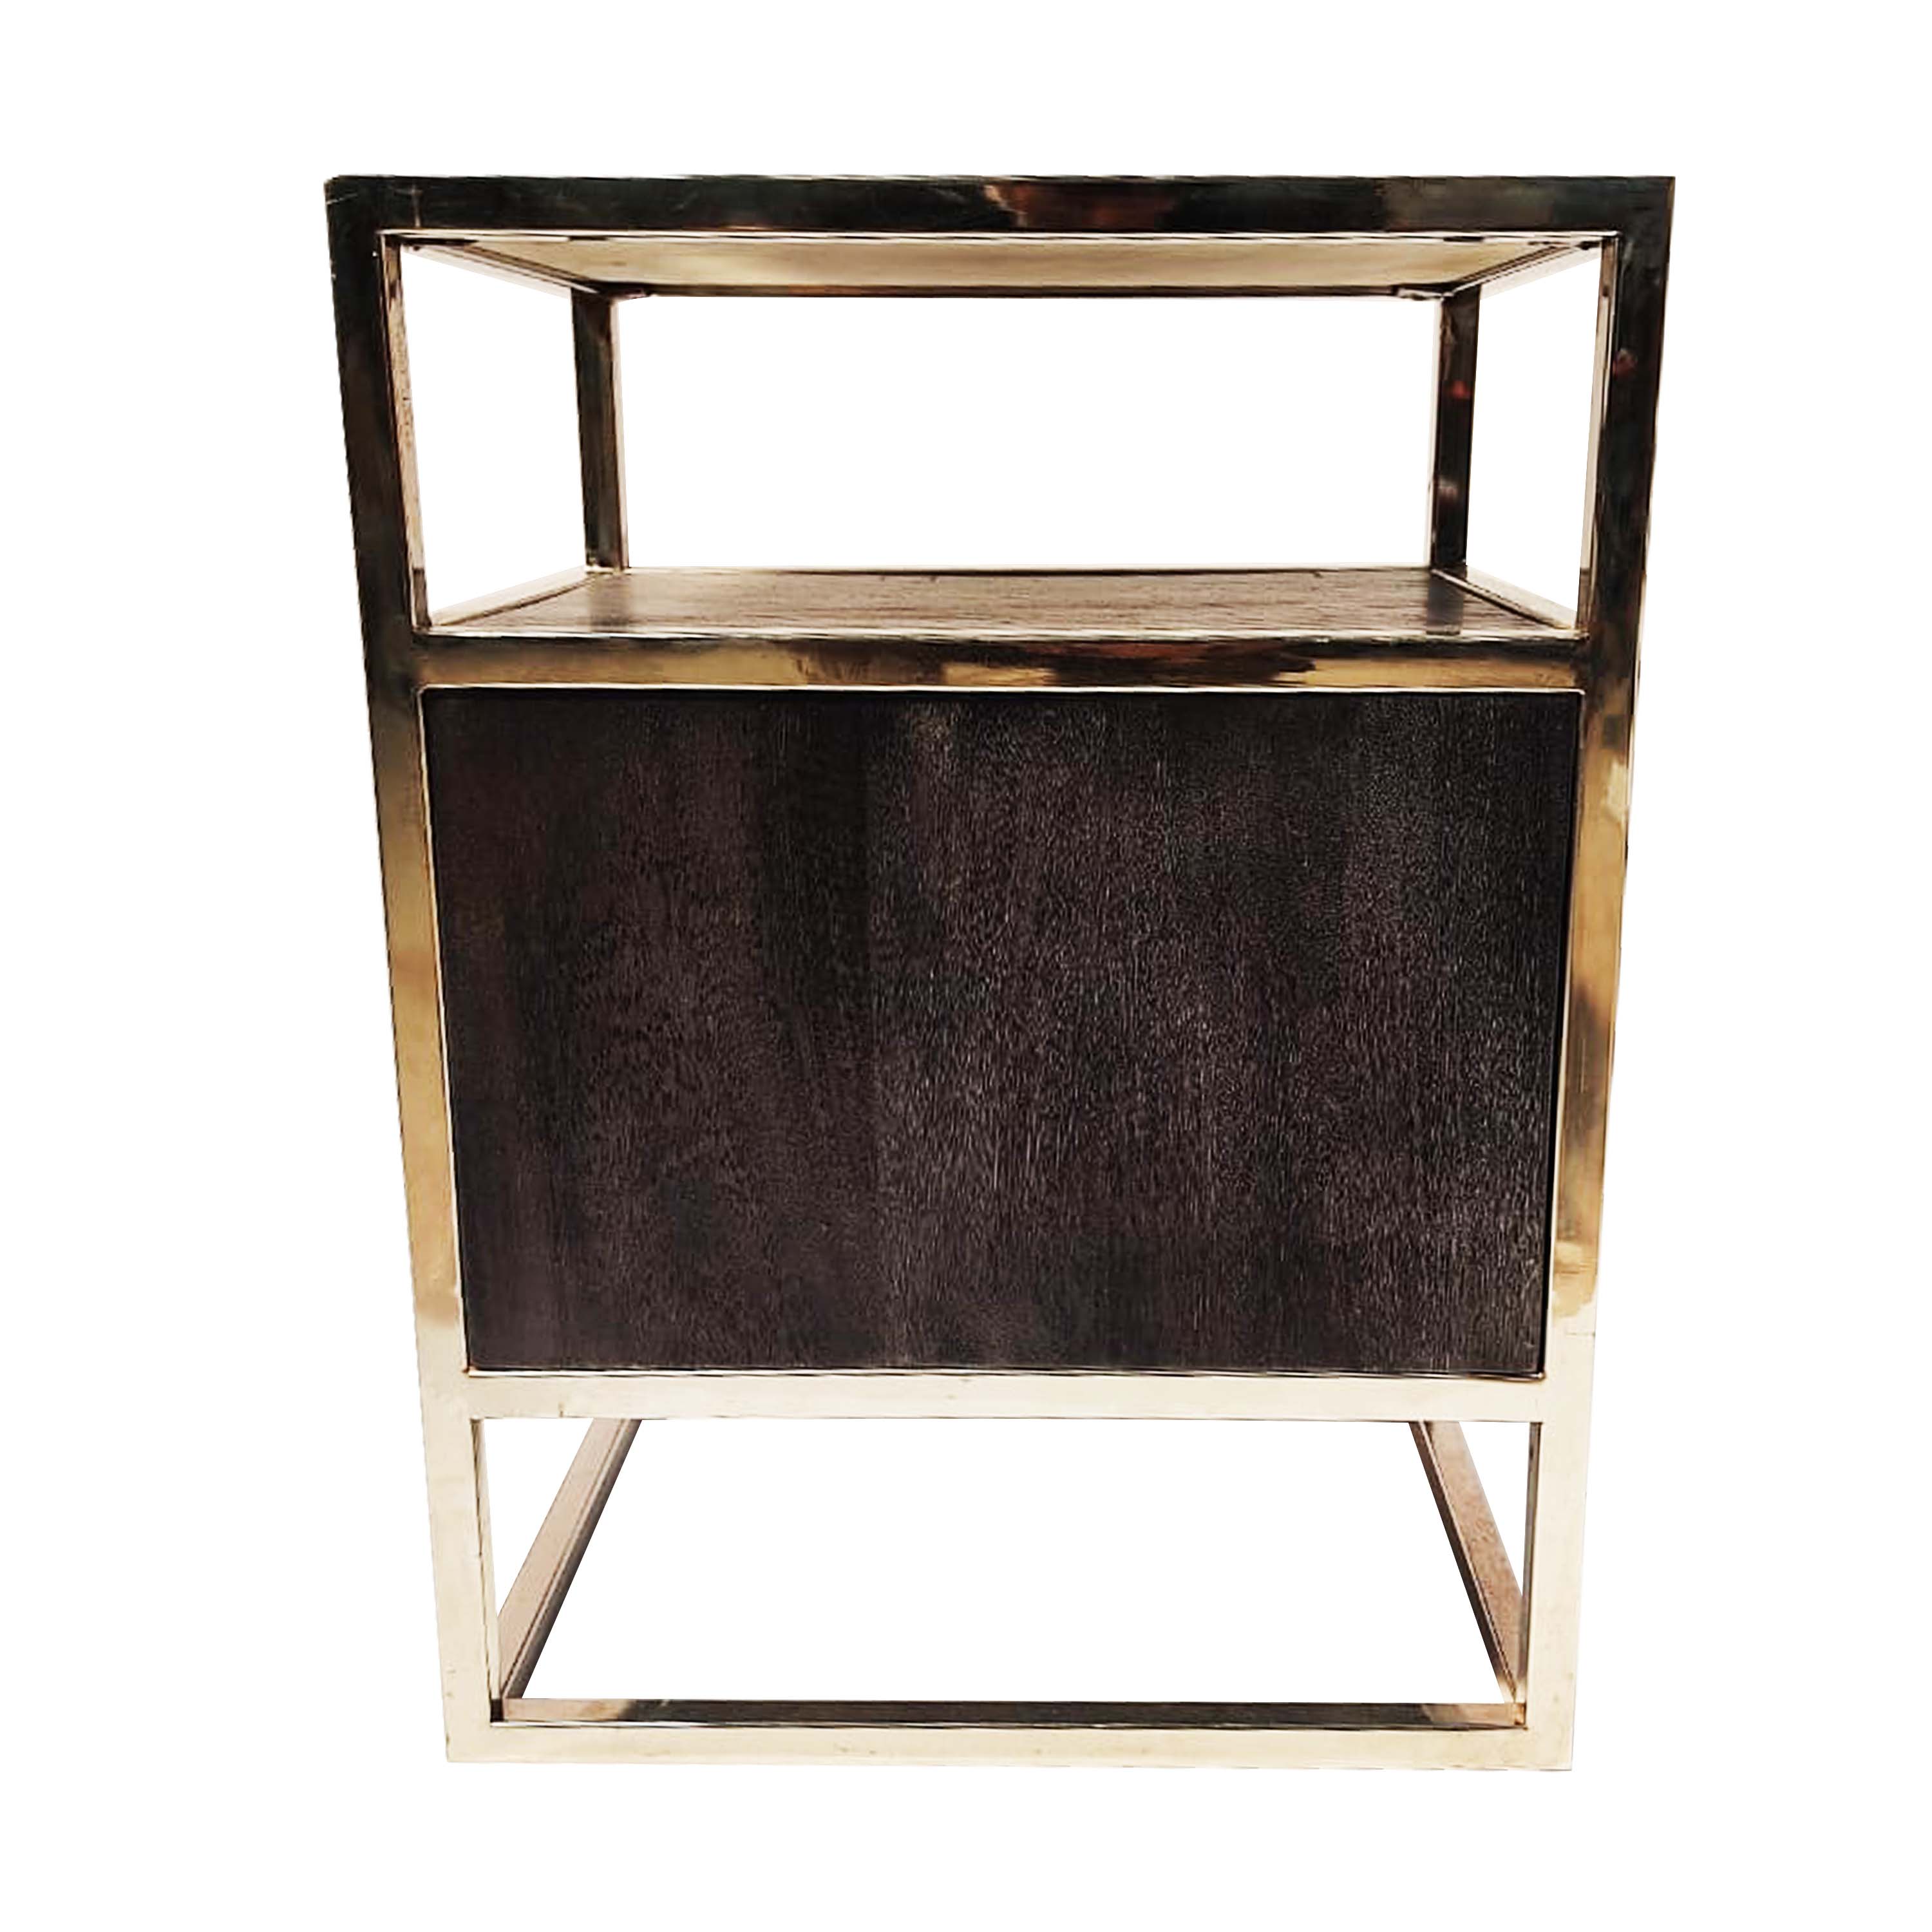 Side table /media unit stainless steel  with black wood finish with marble top